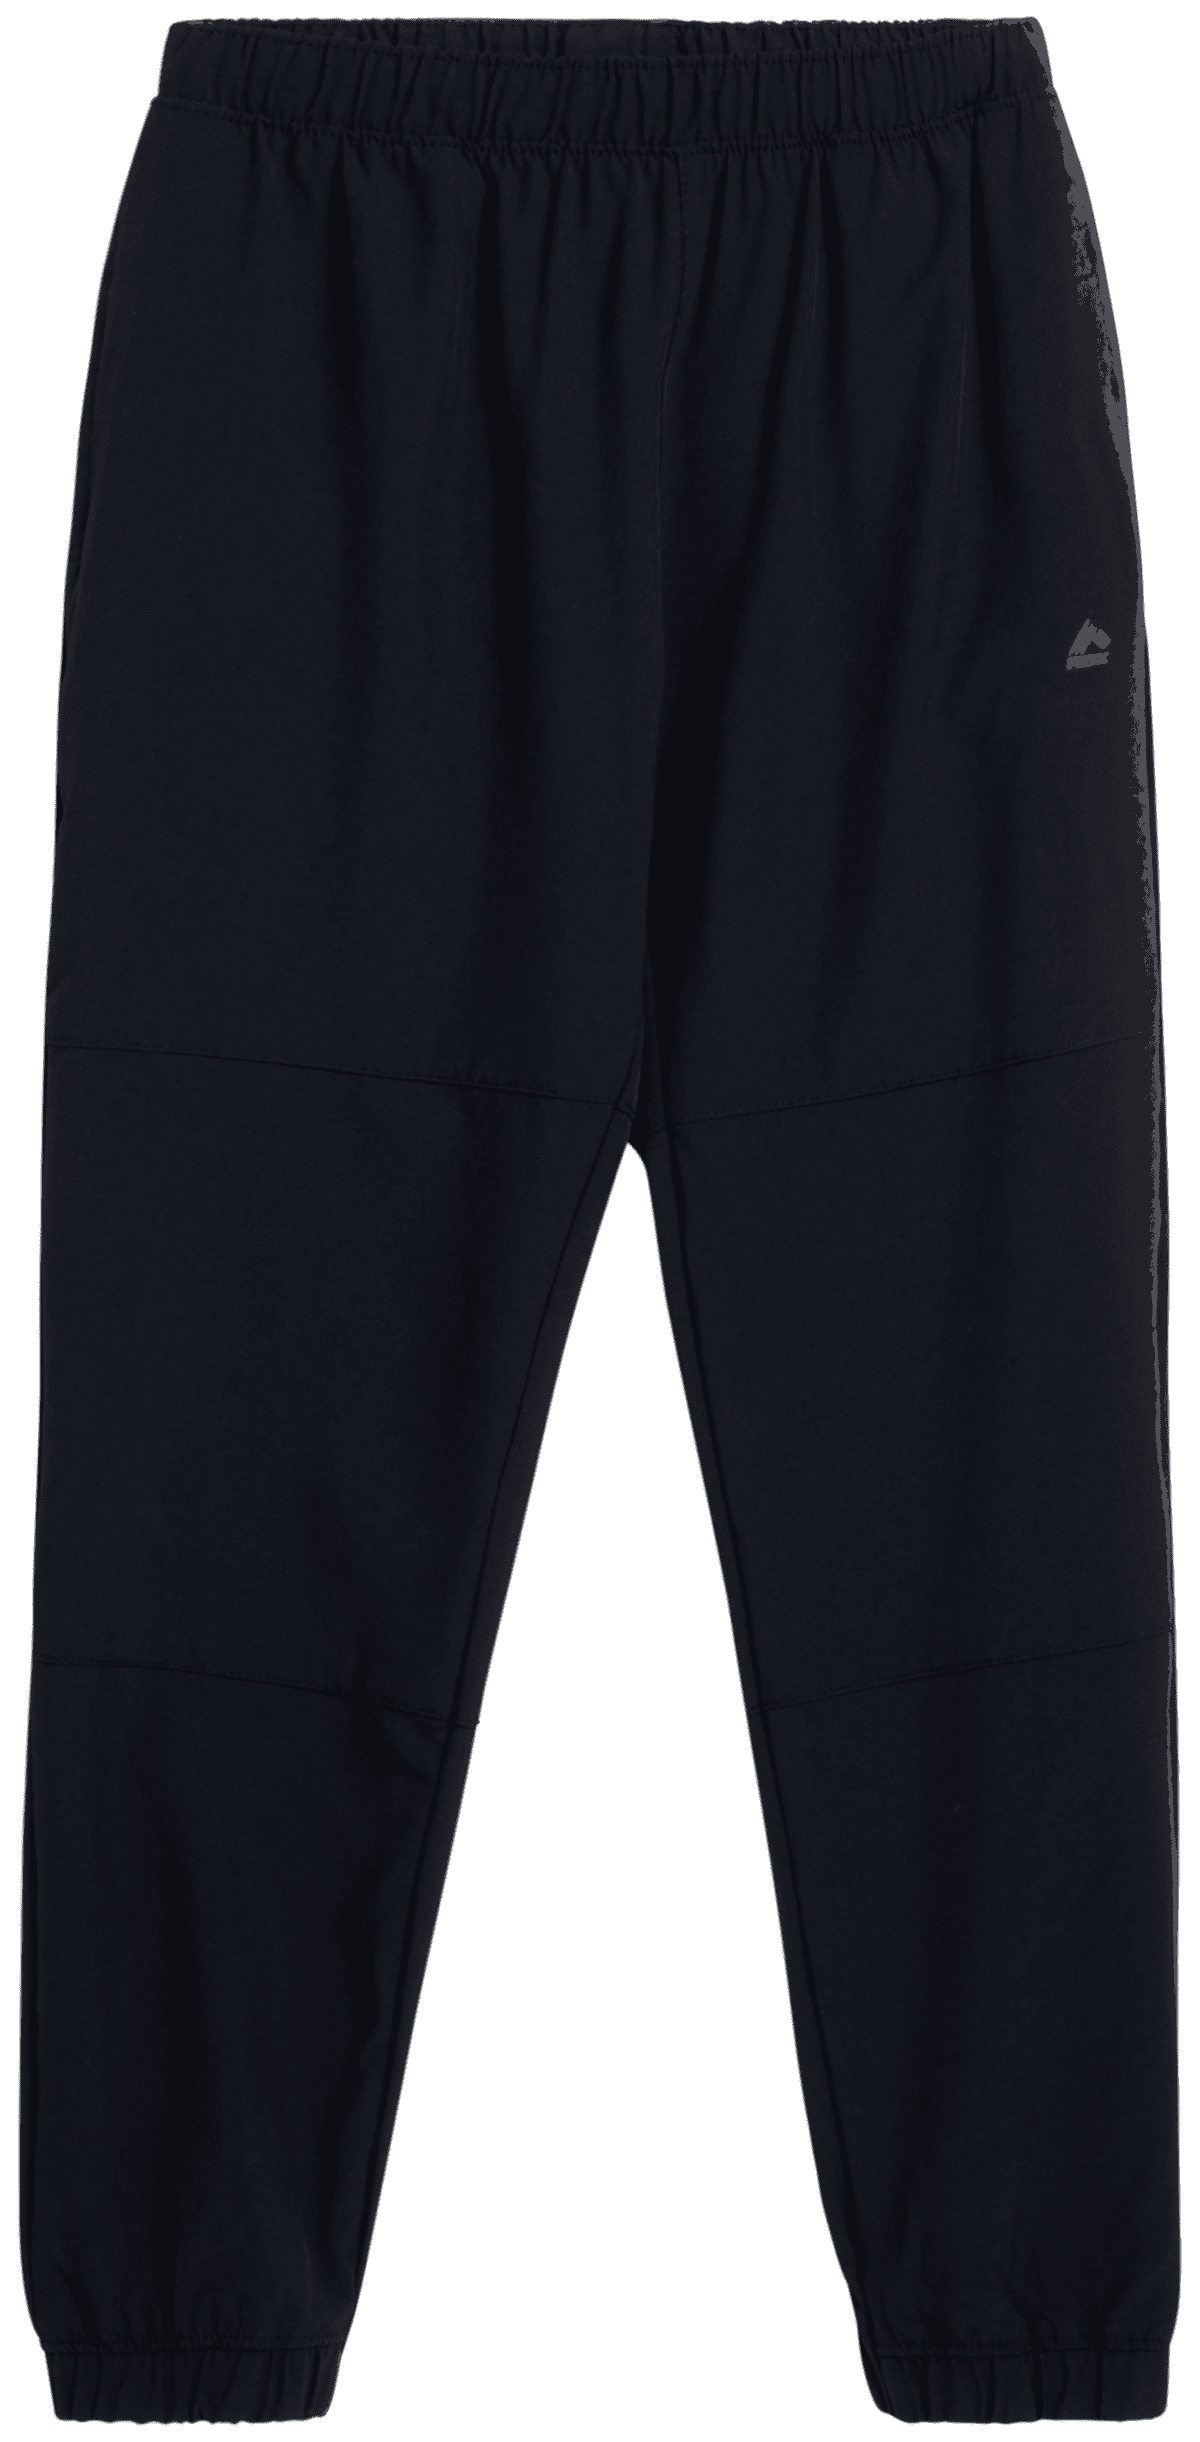  RBX Women's Ankle Length Quick Drying Woven Jogger